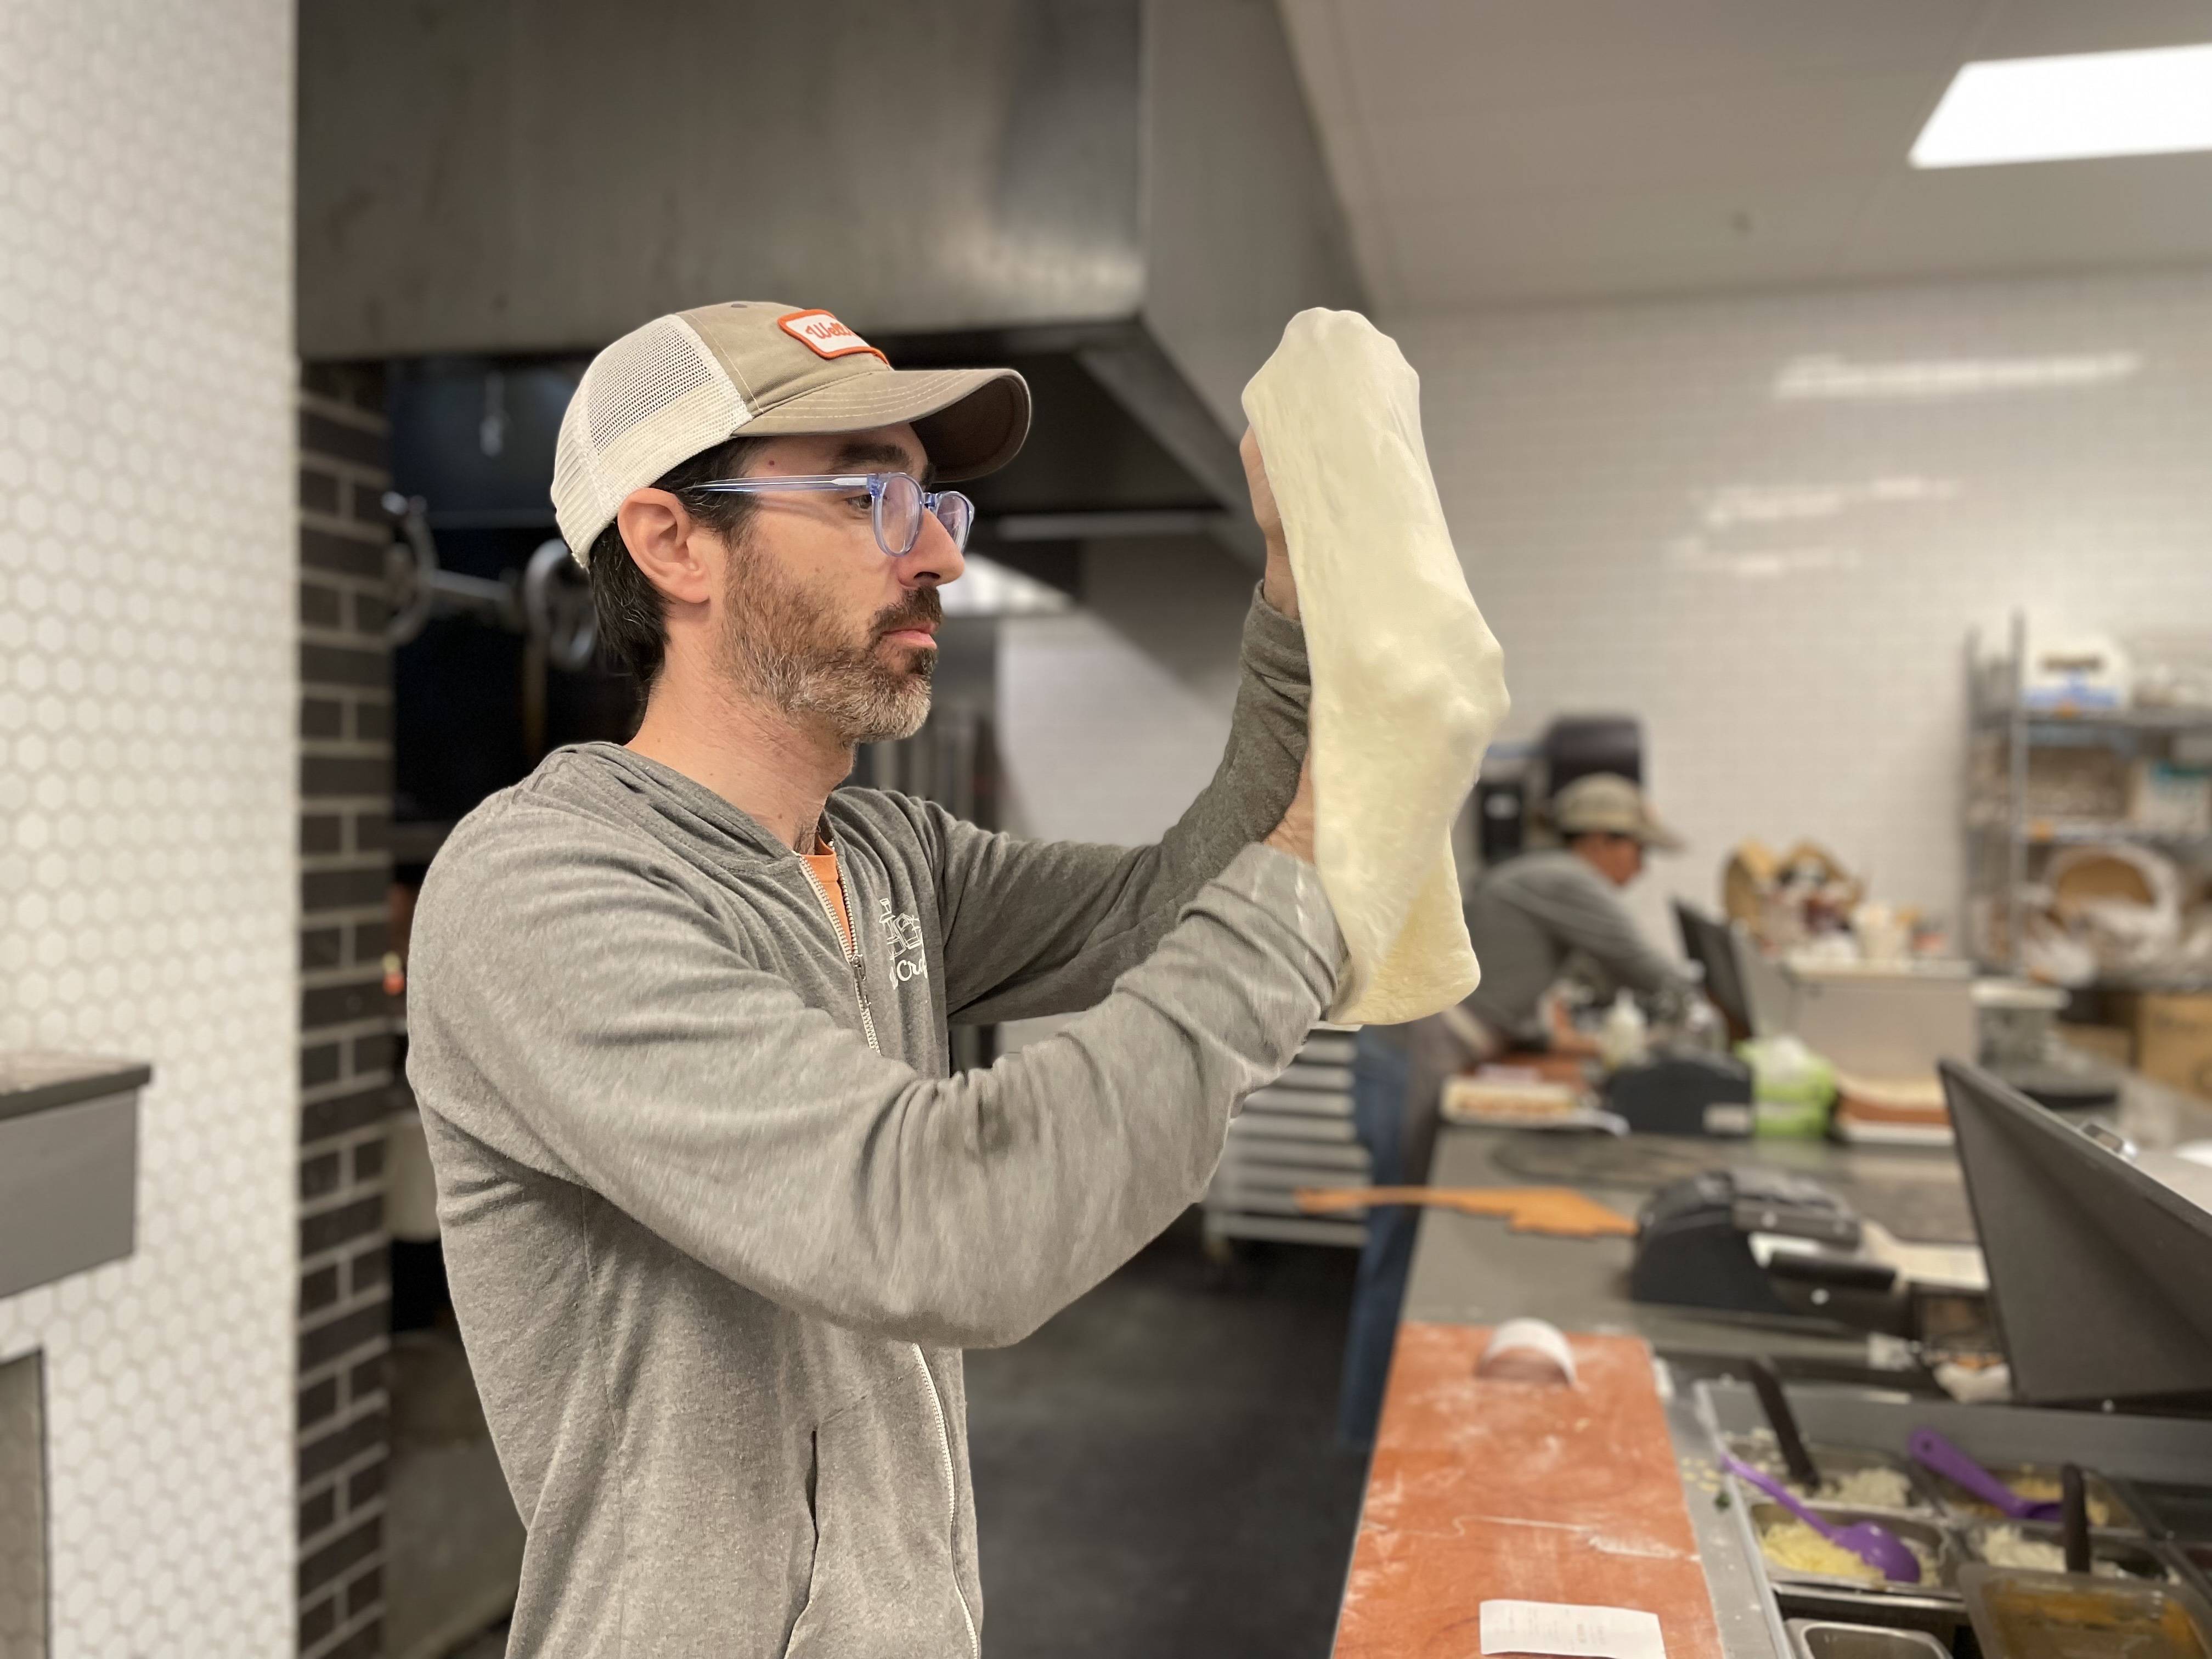 Tom Wagner, co-owner of Well Crafted Kitchen, has a full time job in addition to running the restaurant. "We're tired," he said in an interview about the decision to close the business, despite its success.